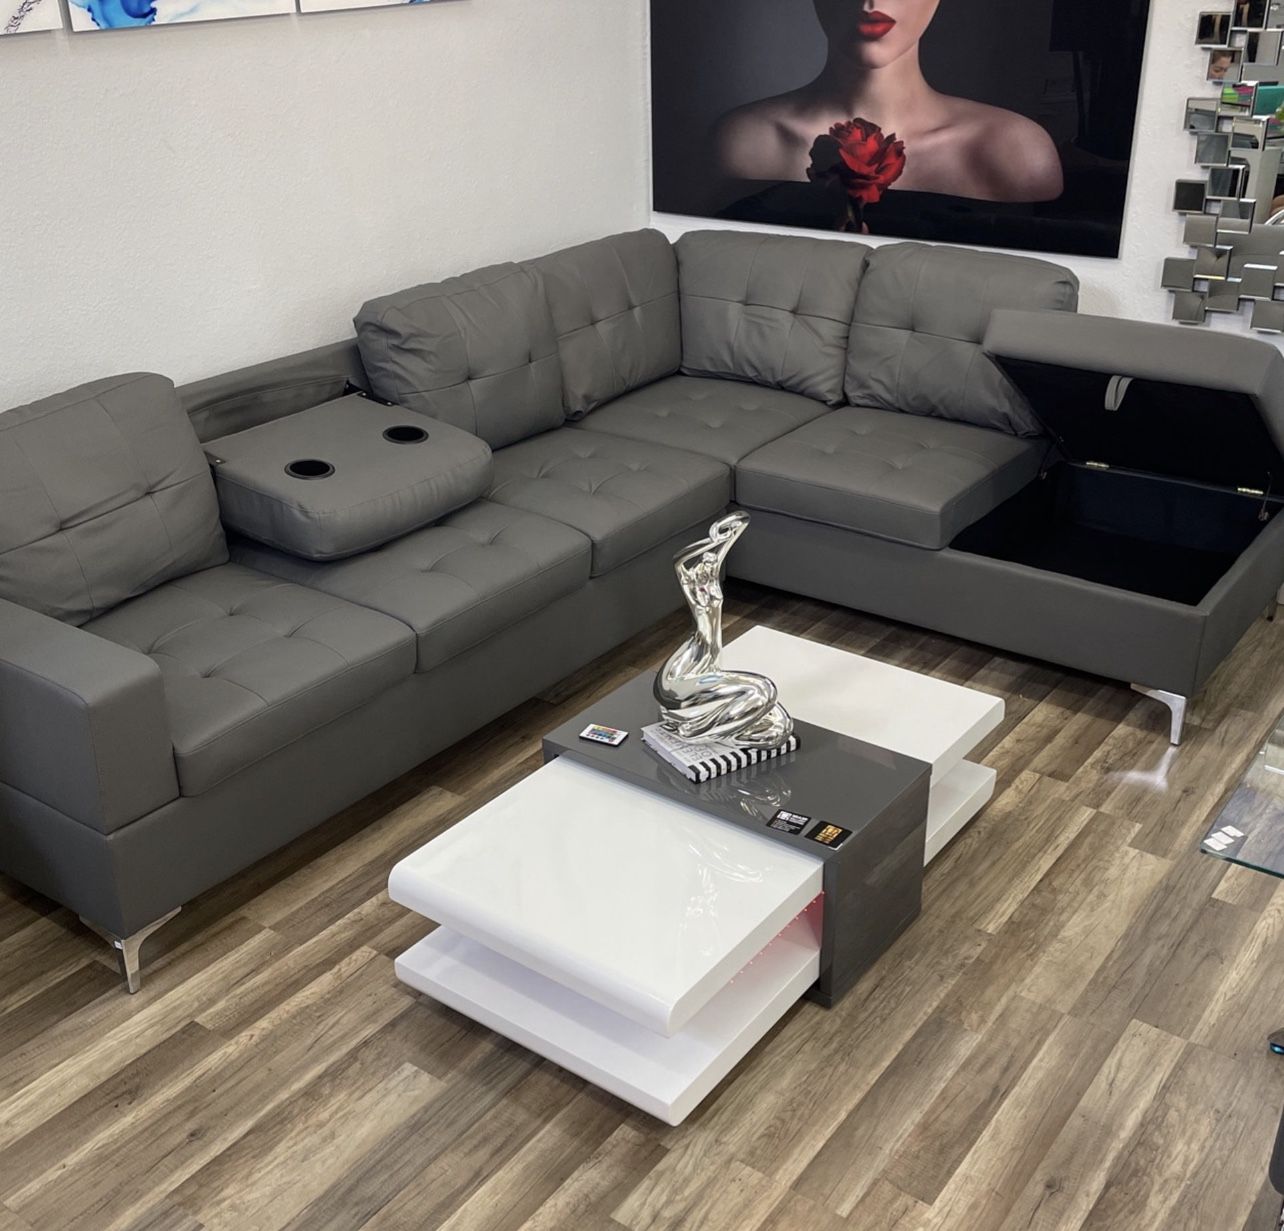 Brand new sectionals sofas in box- Flexible Payment options available $39 down. (Message for details) 